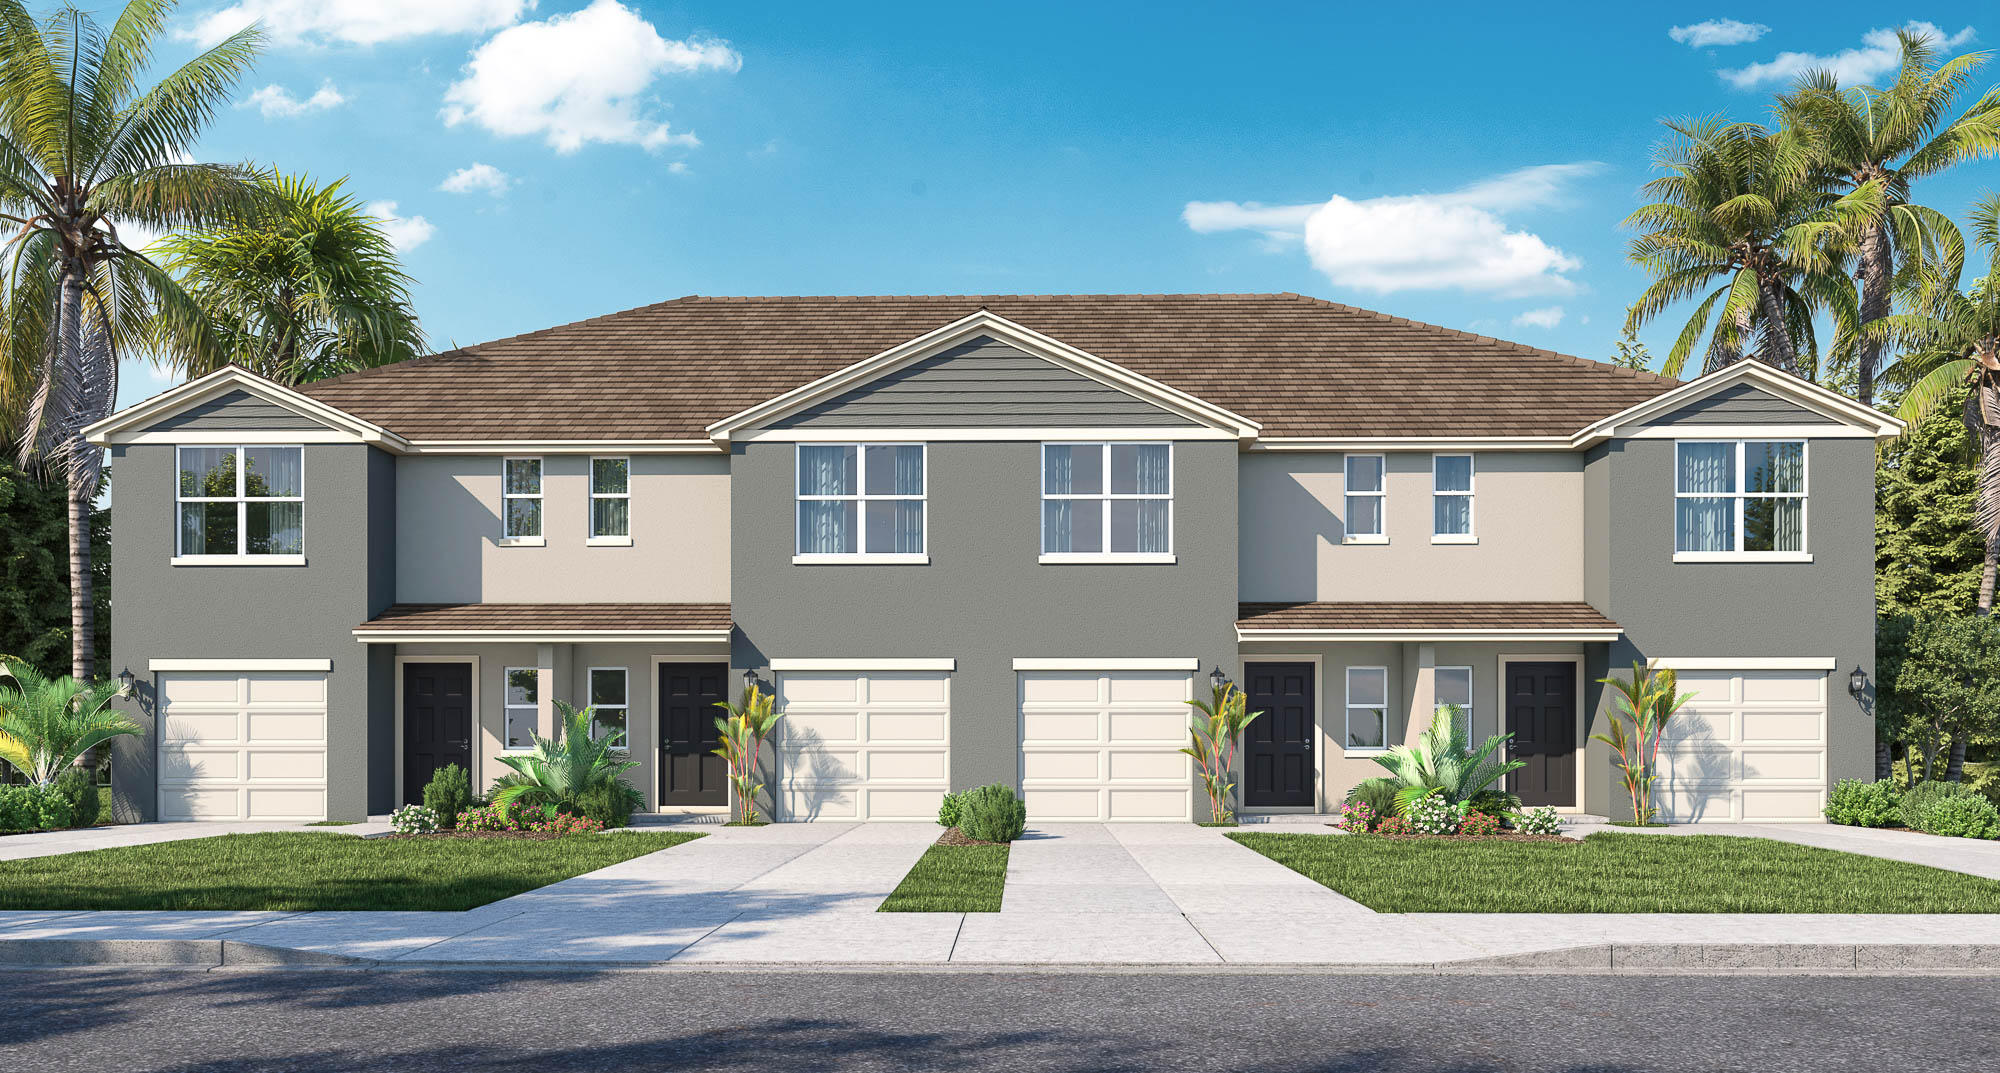 Image 2 | Crestview at Grove West - Townhomes for Rent